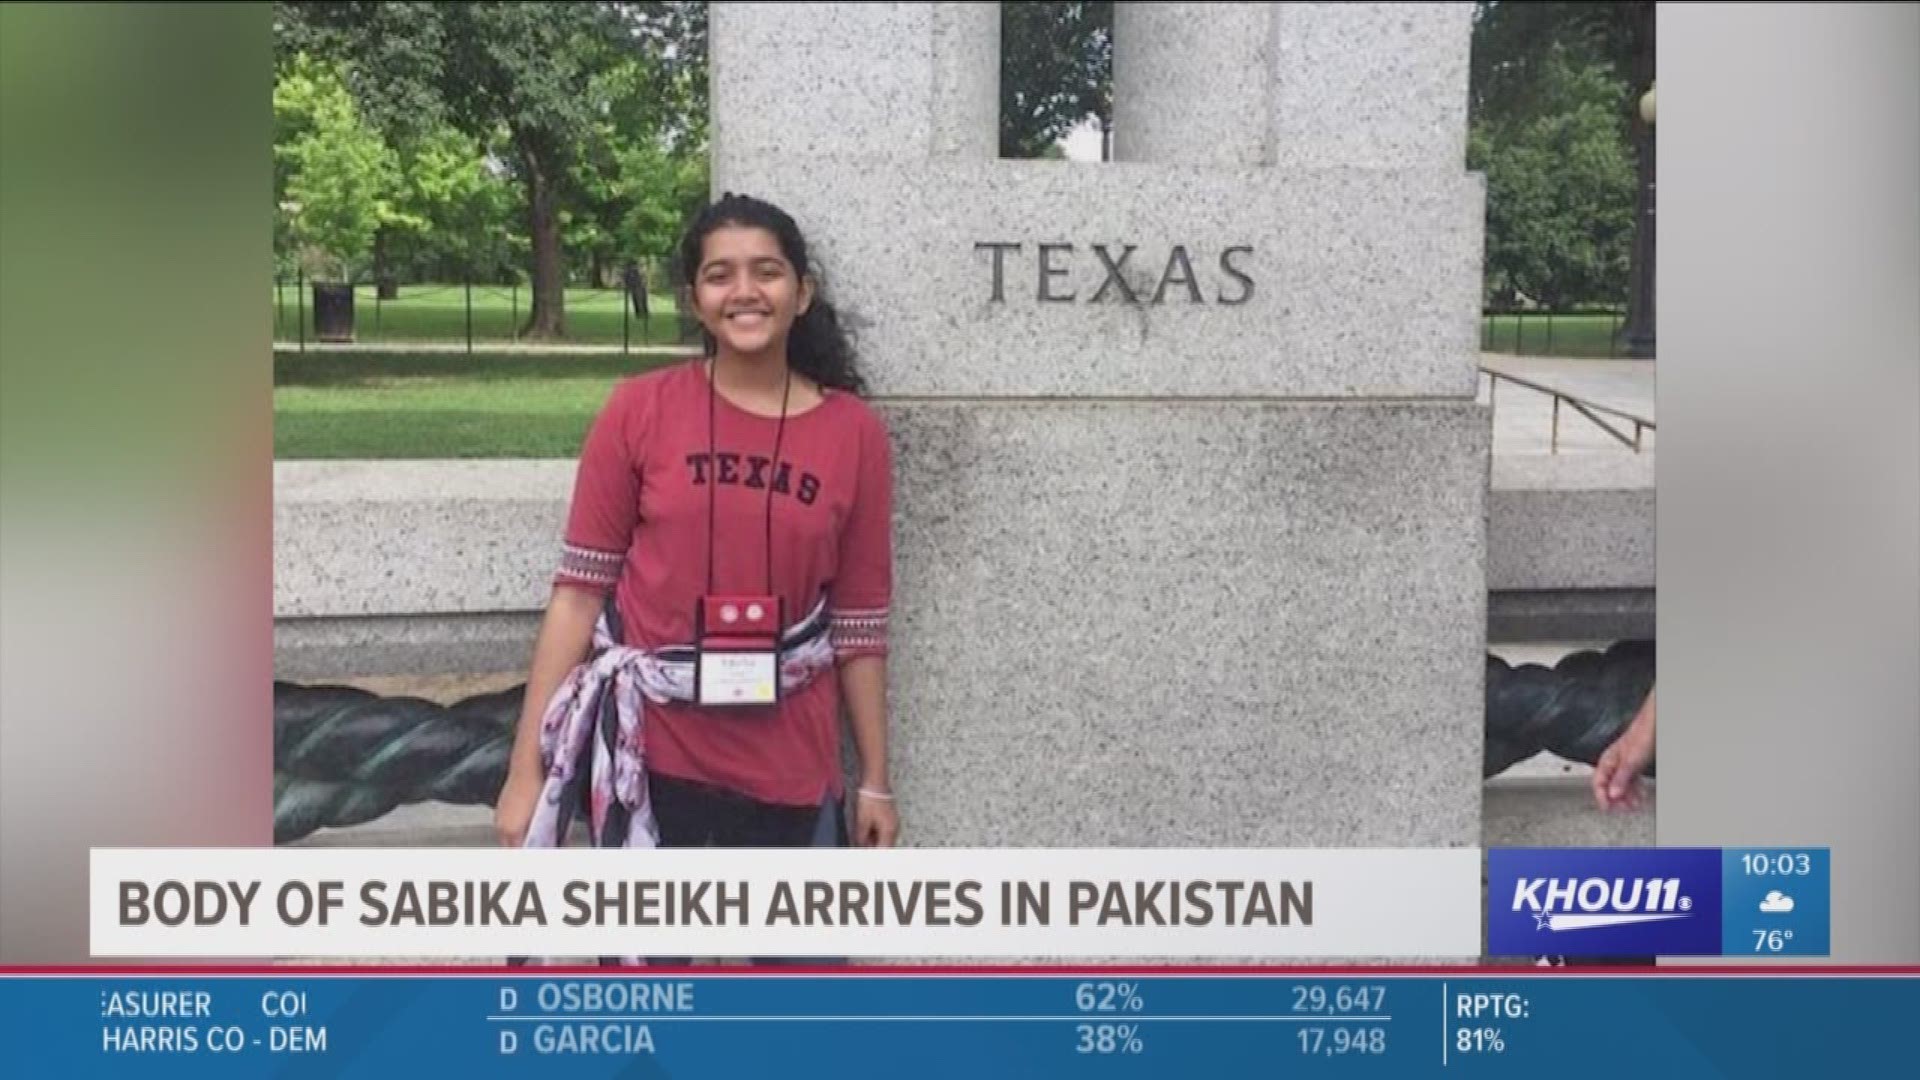 The body of a 17-year-old Pakistani exchange student Sabika Sheikh arrived in Karachi.